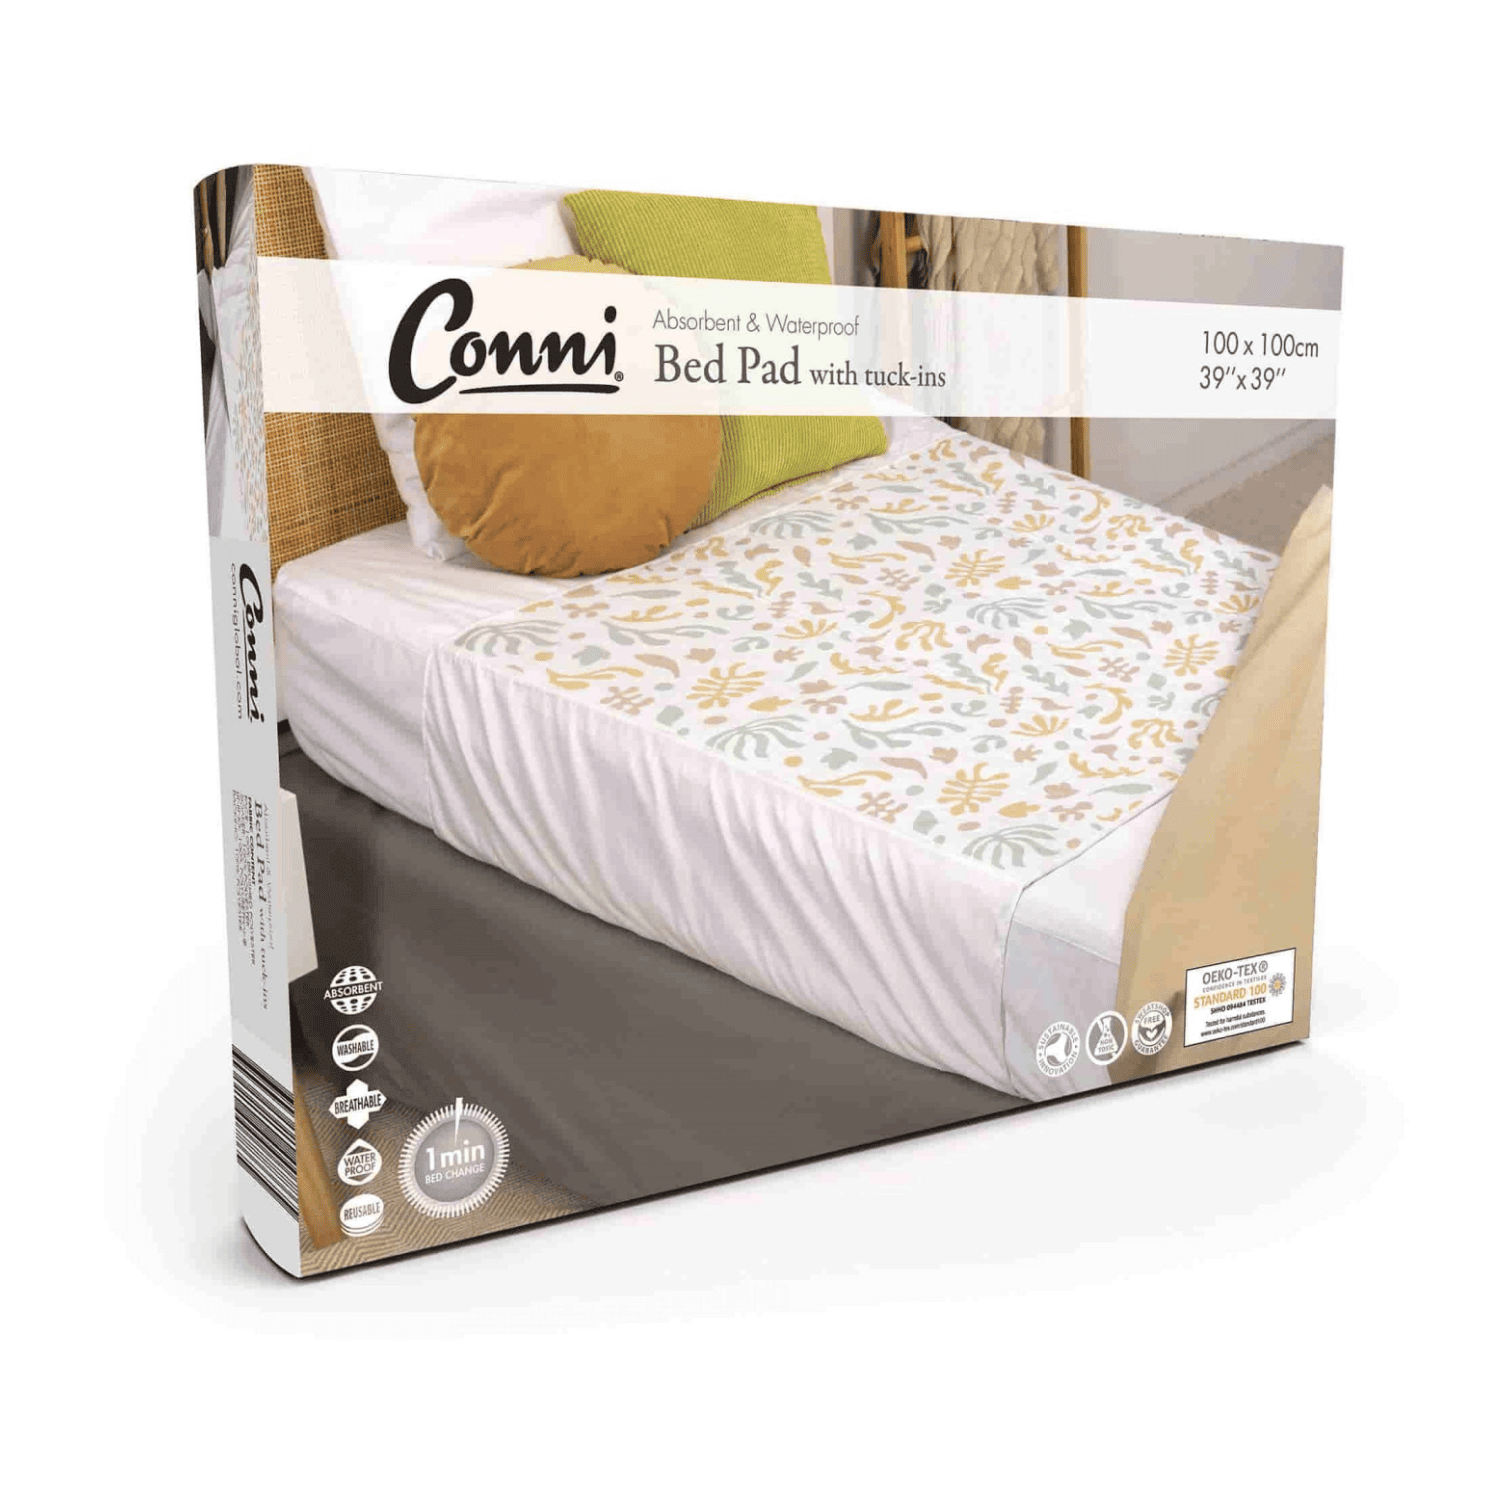 Conni Bed Pad with Tuck-ins_Organic Print